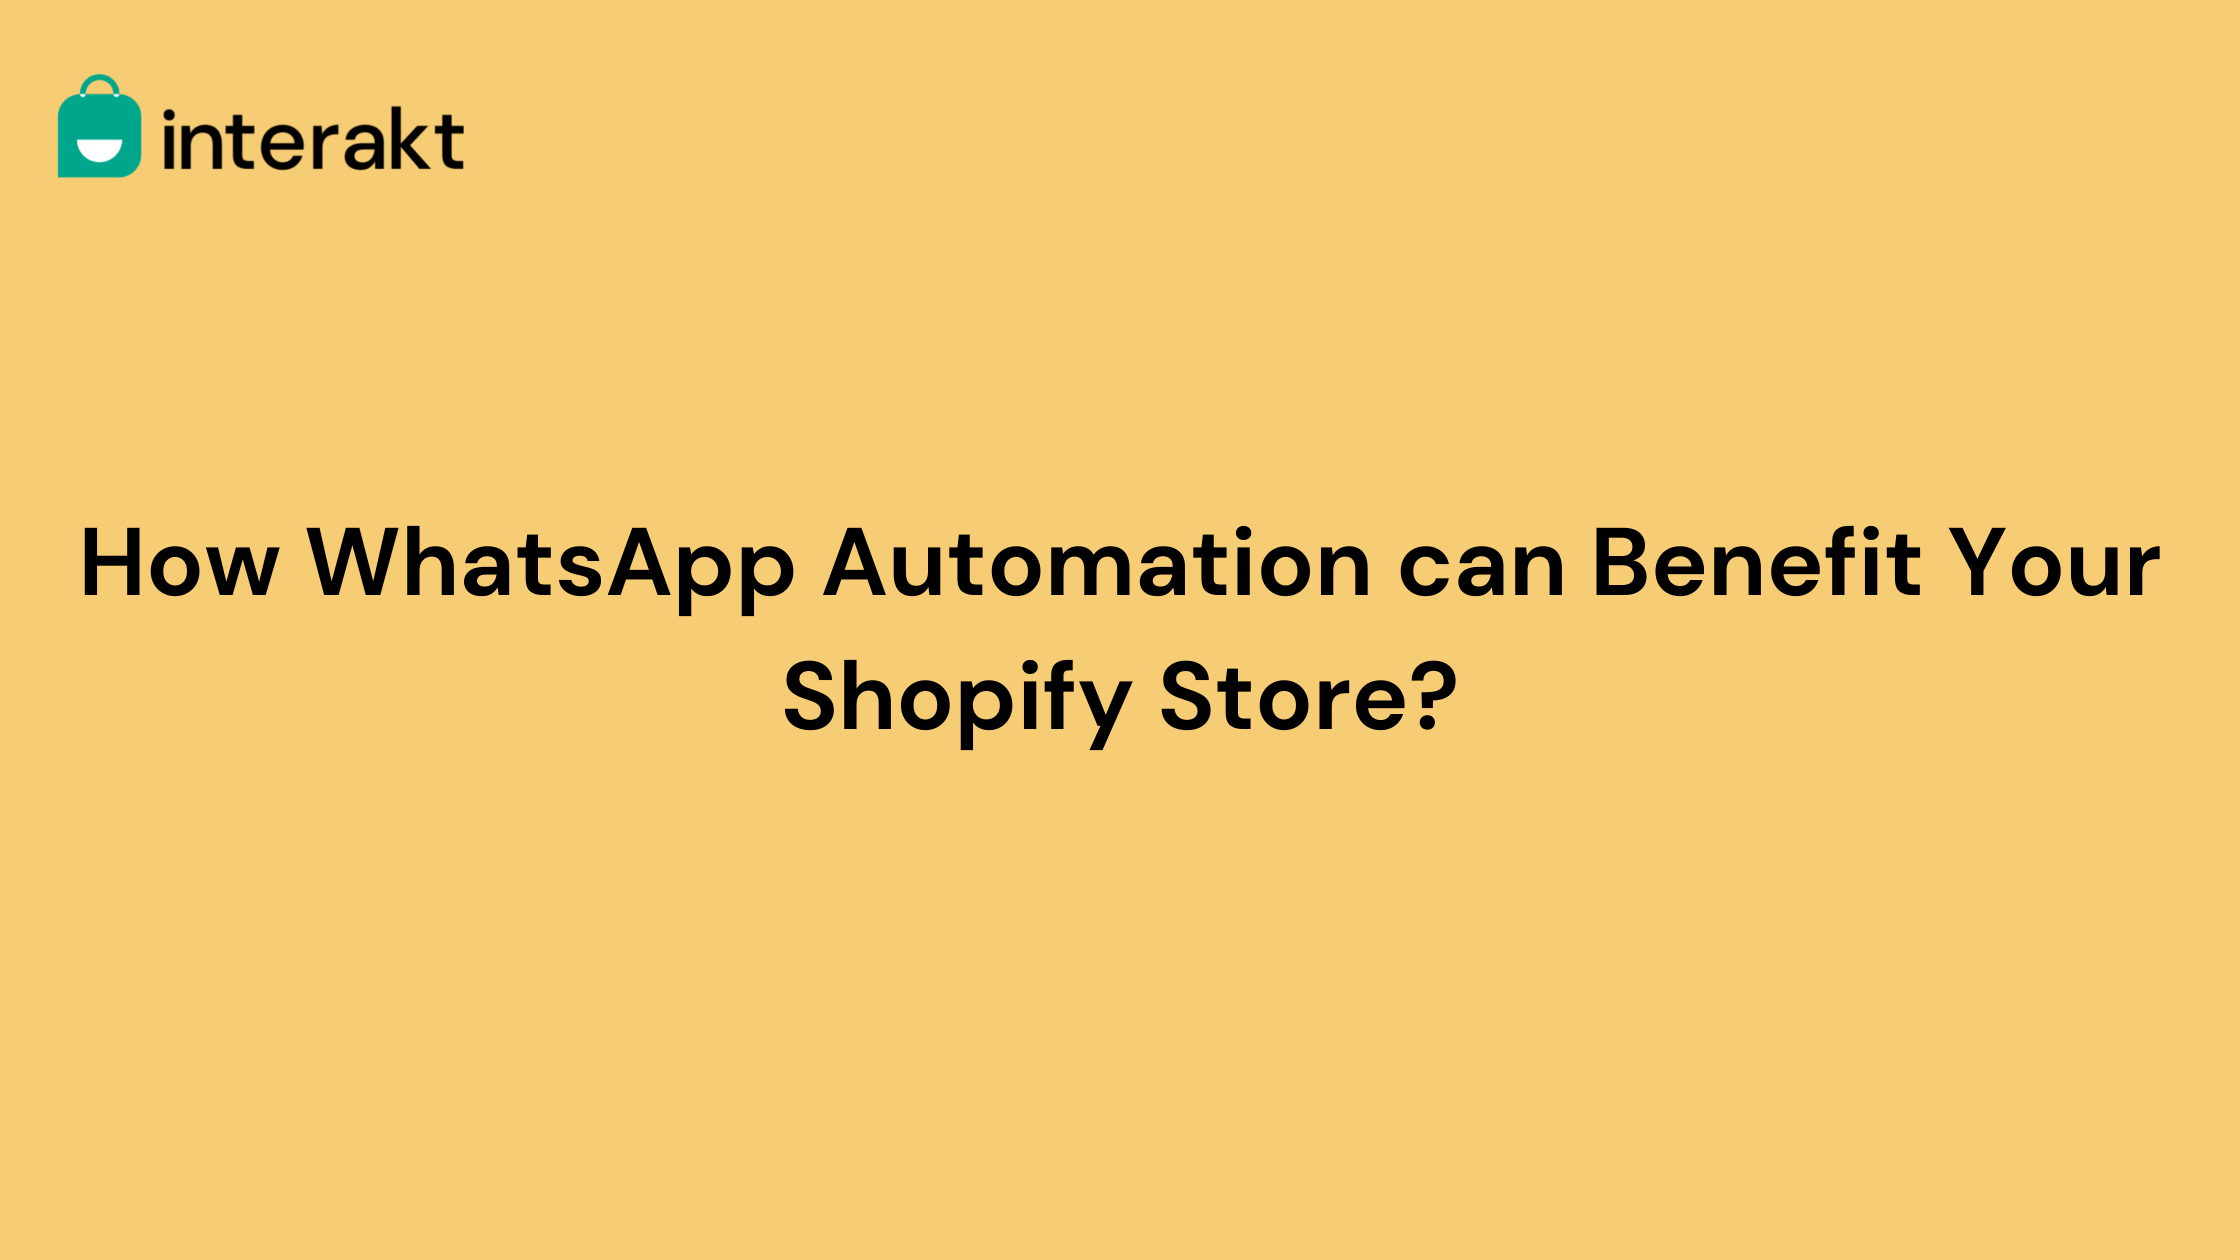 How WhatsApp Automation can Benefit Your Shopify Store